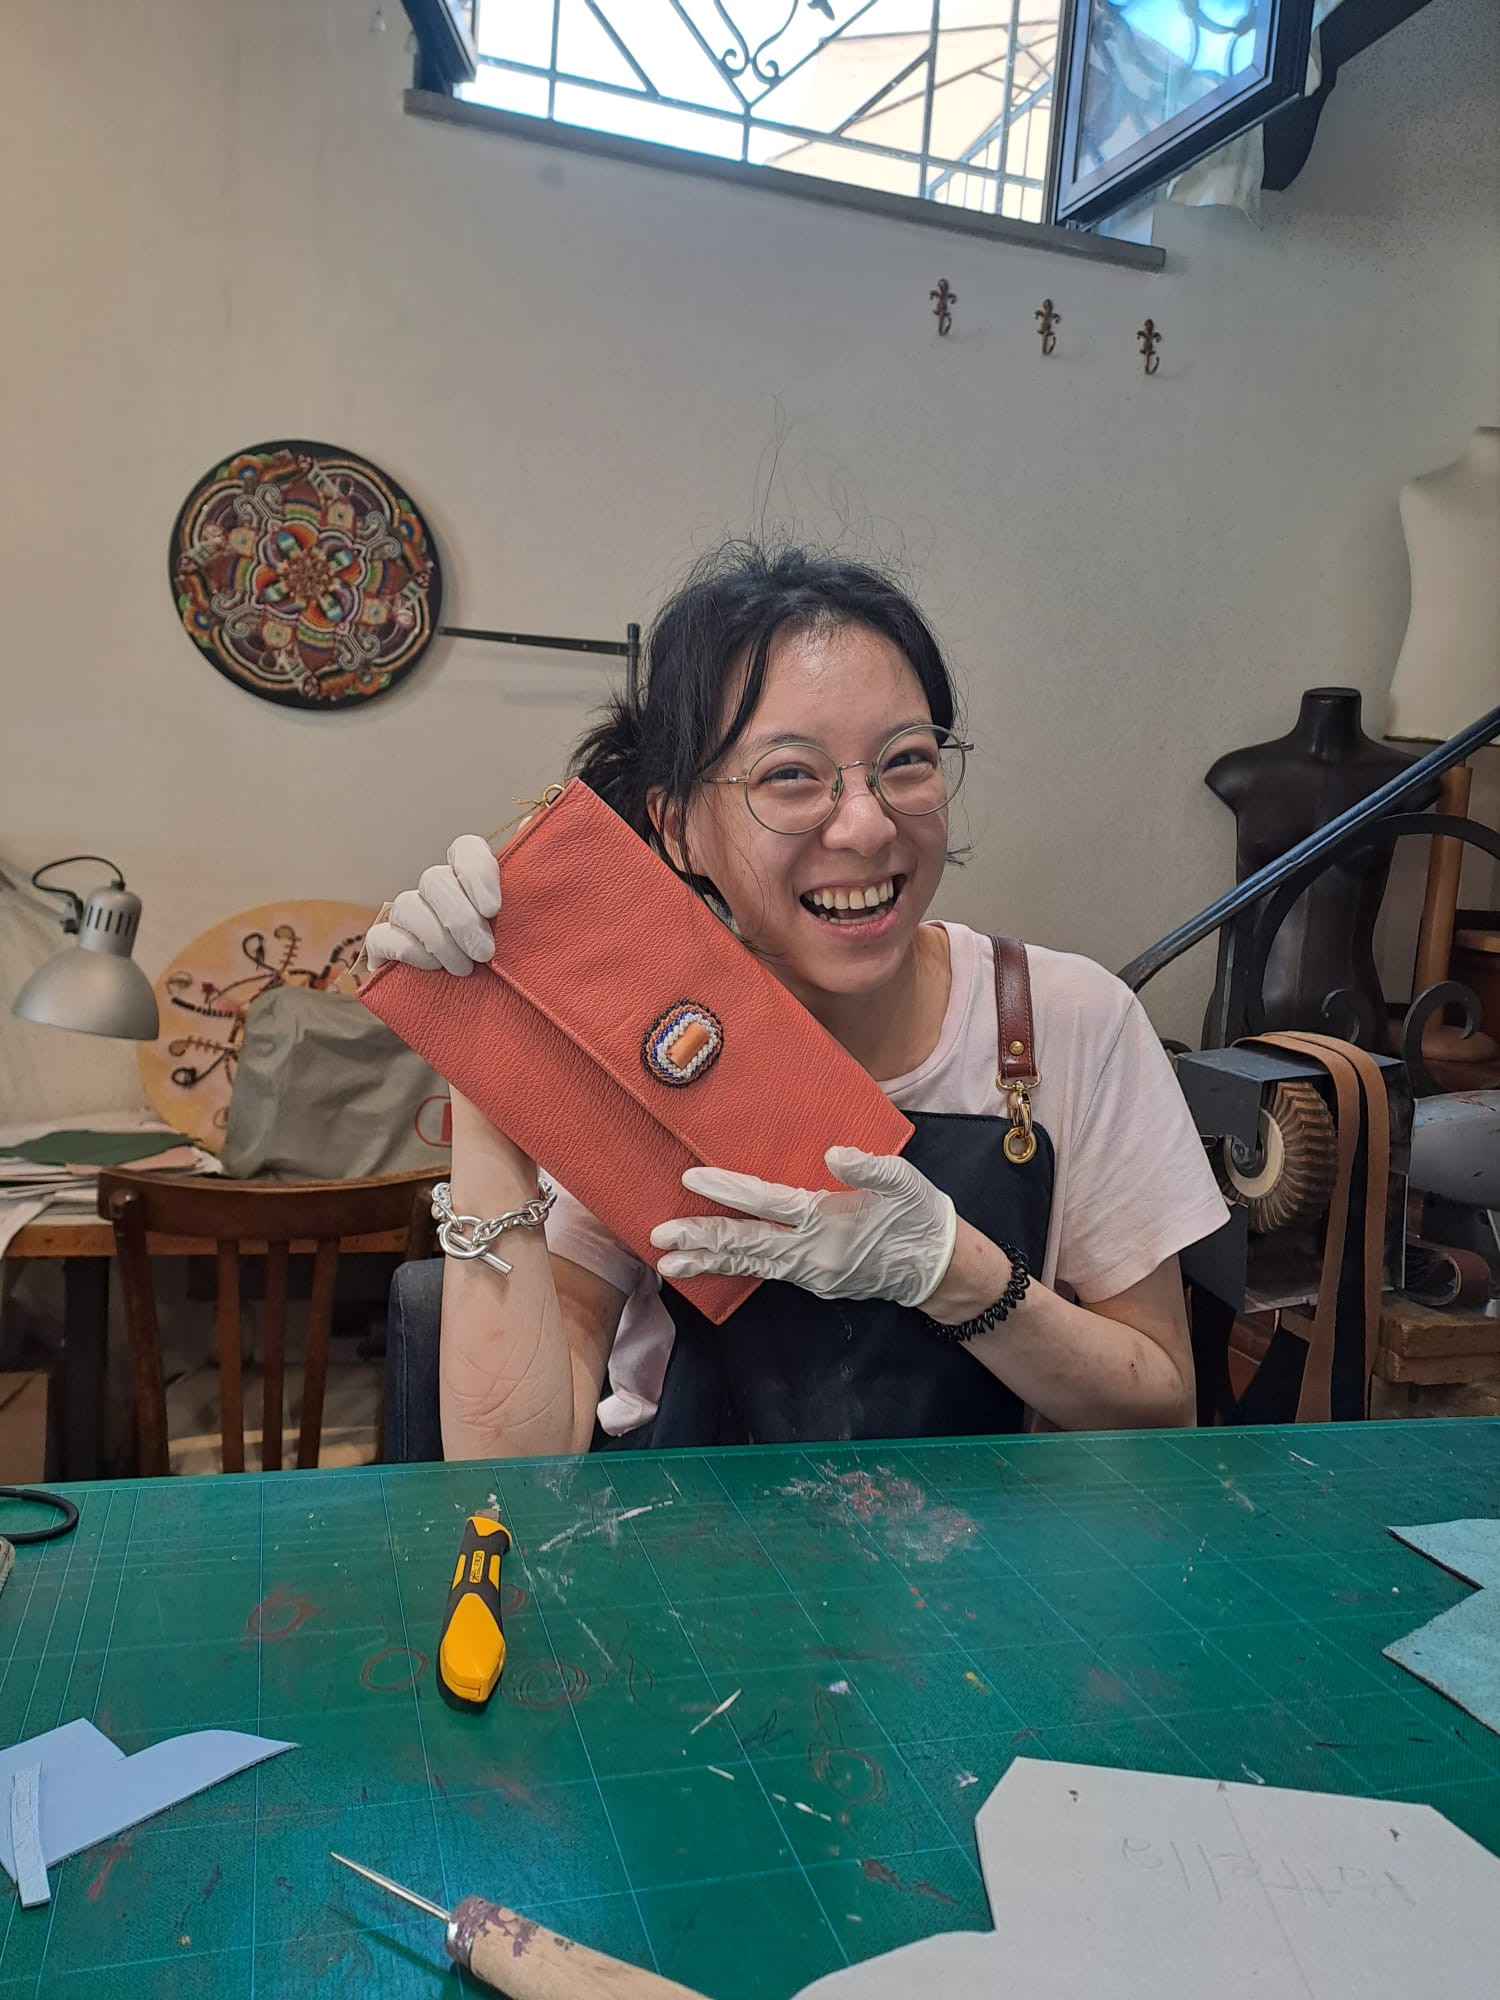 An artisan showcasing her leather work in Florence, Italy